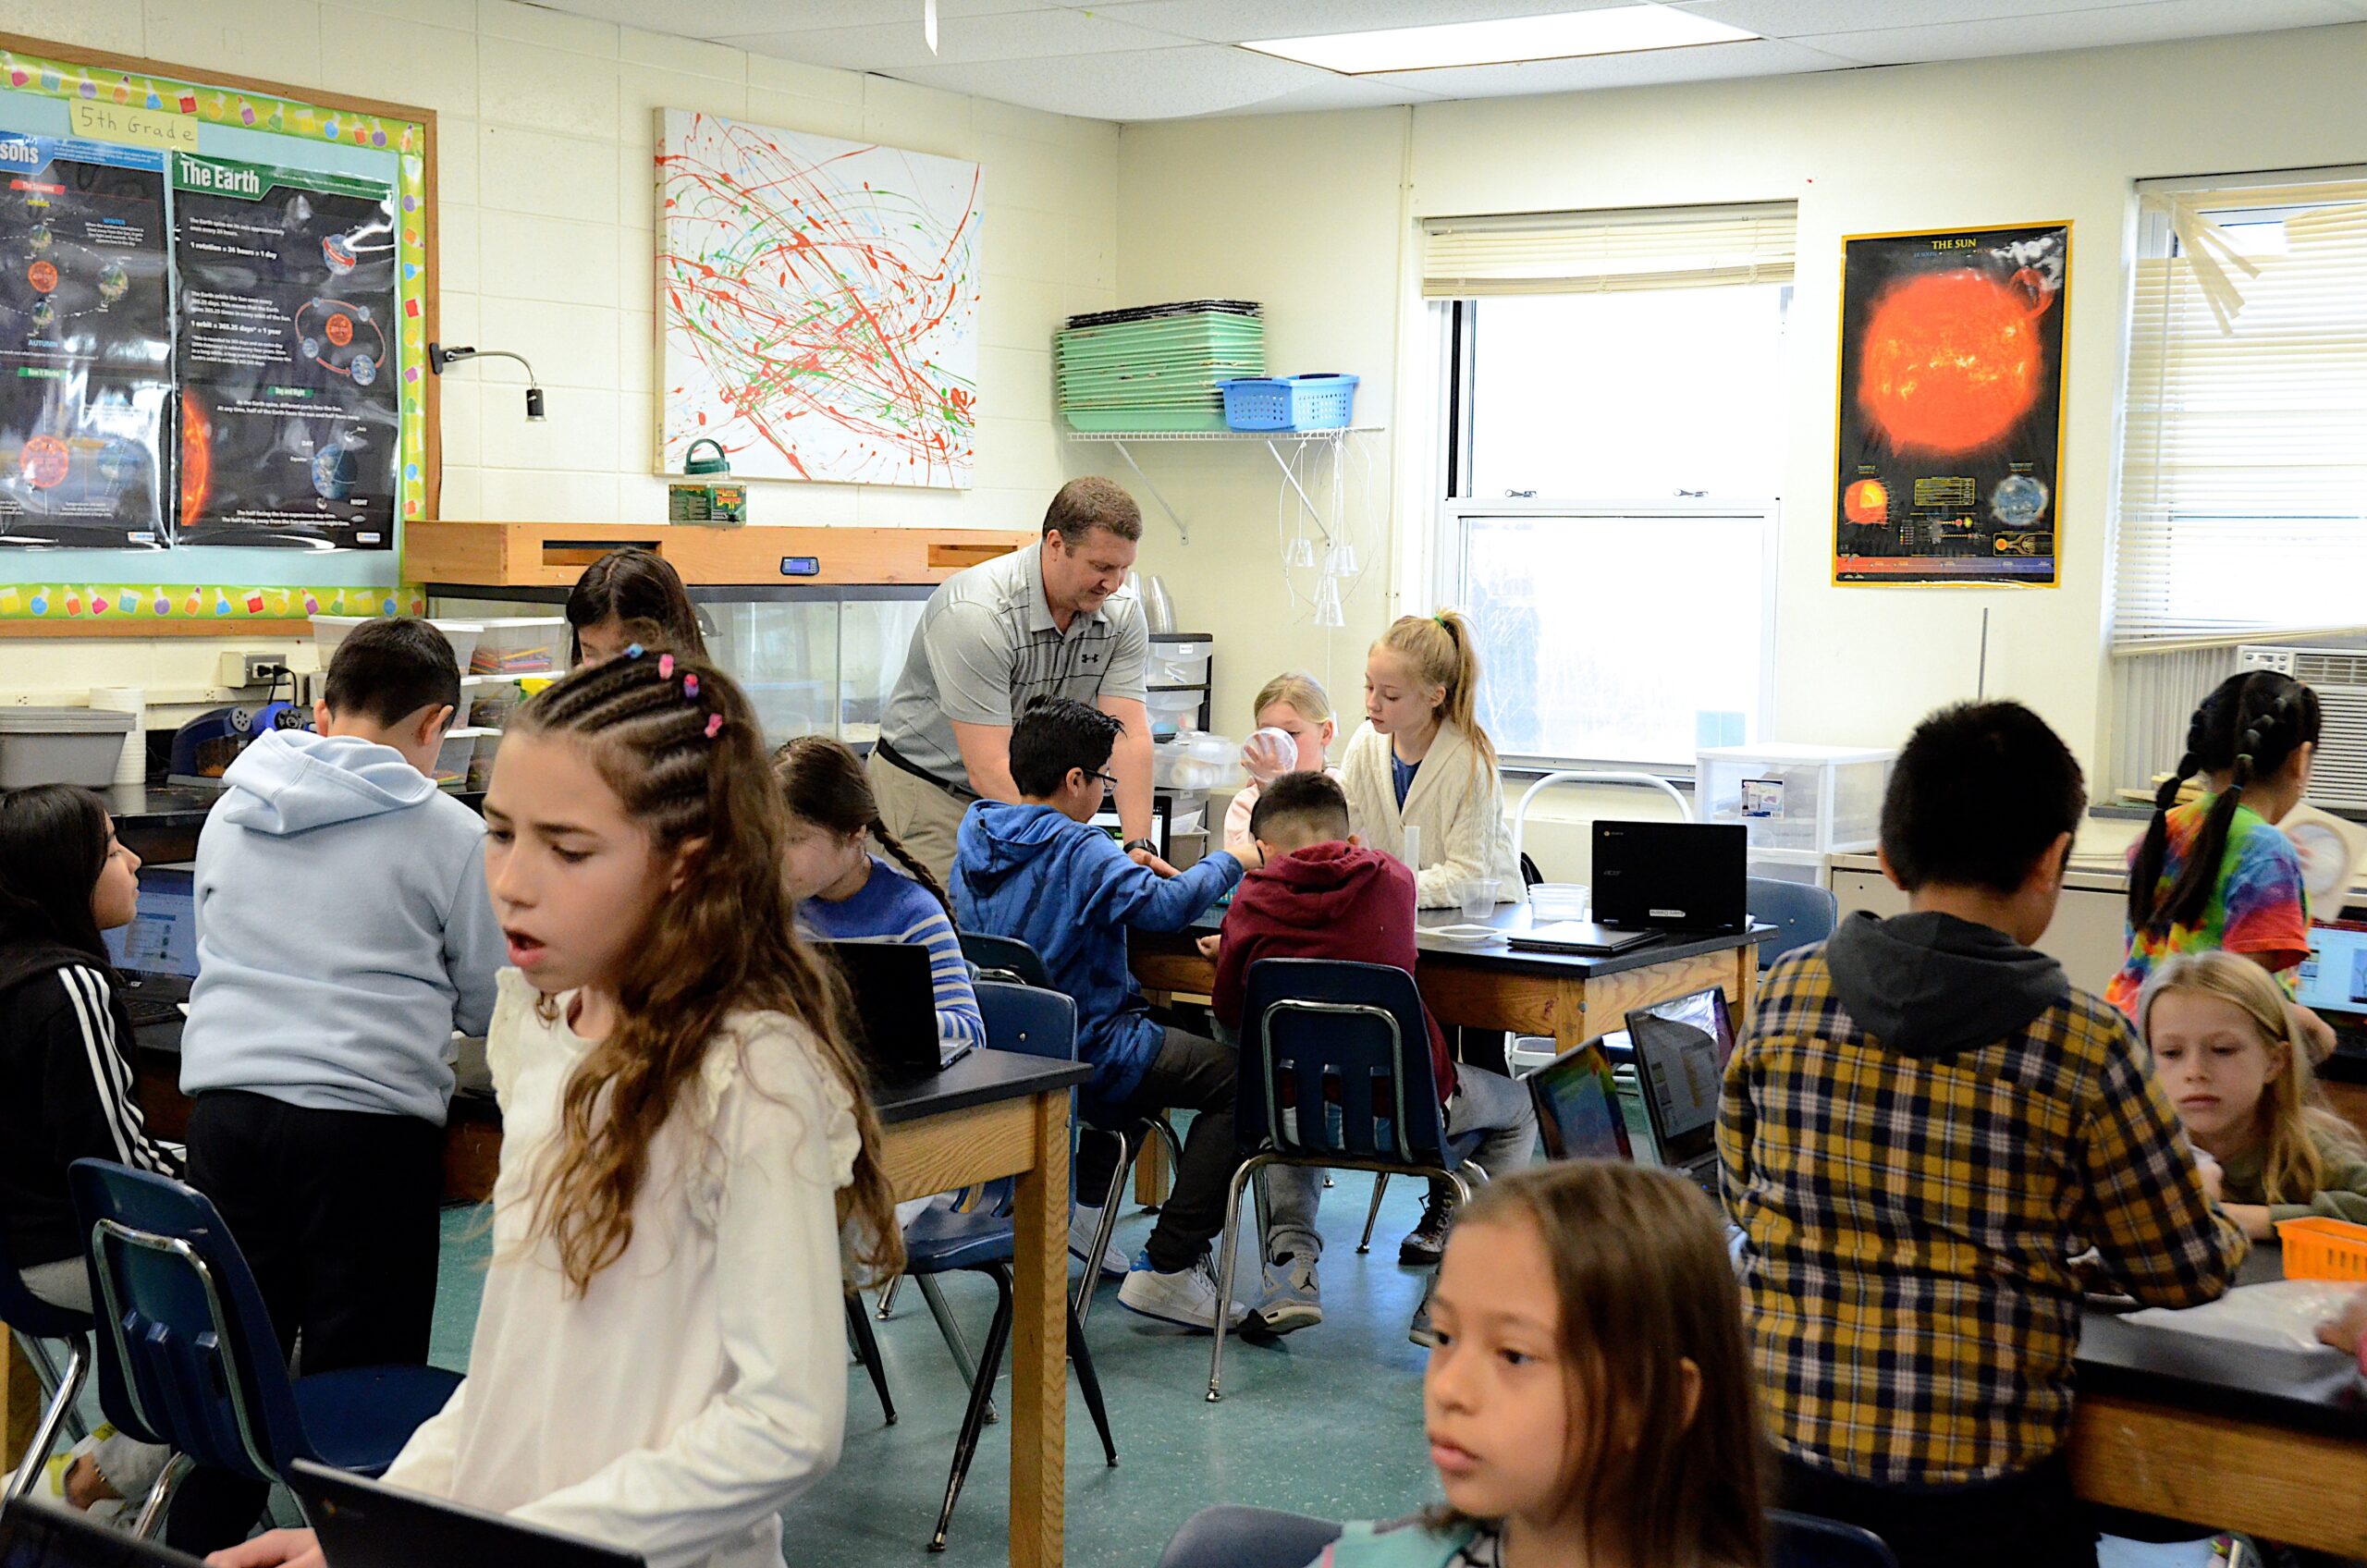 Springs School elementary science teacher Sean Knight works with students on an assignment. KYRIL BROMLEY